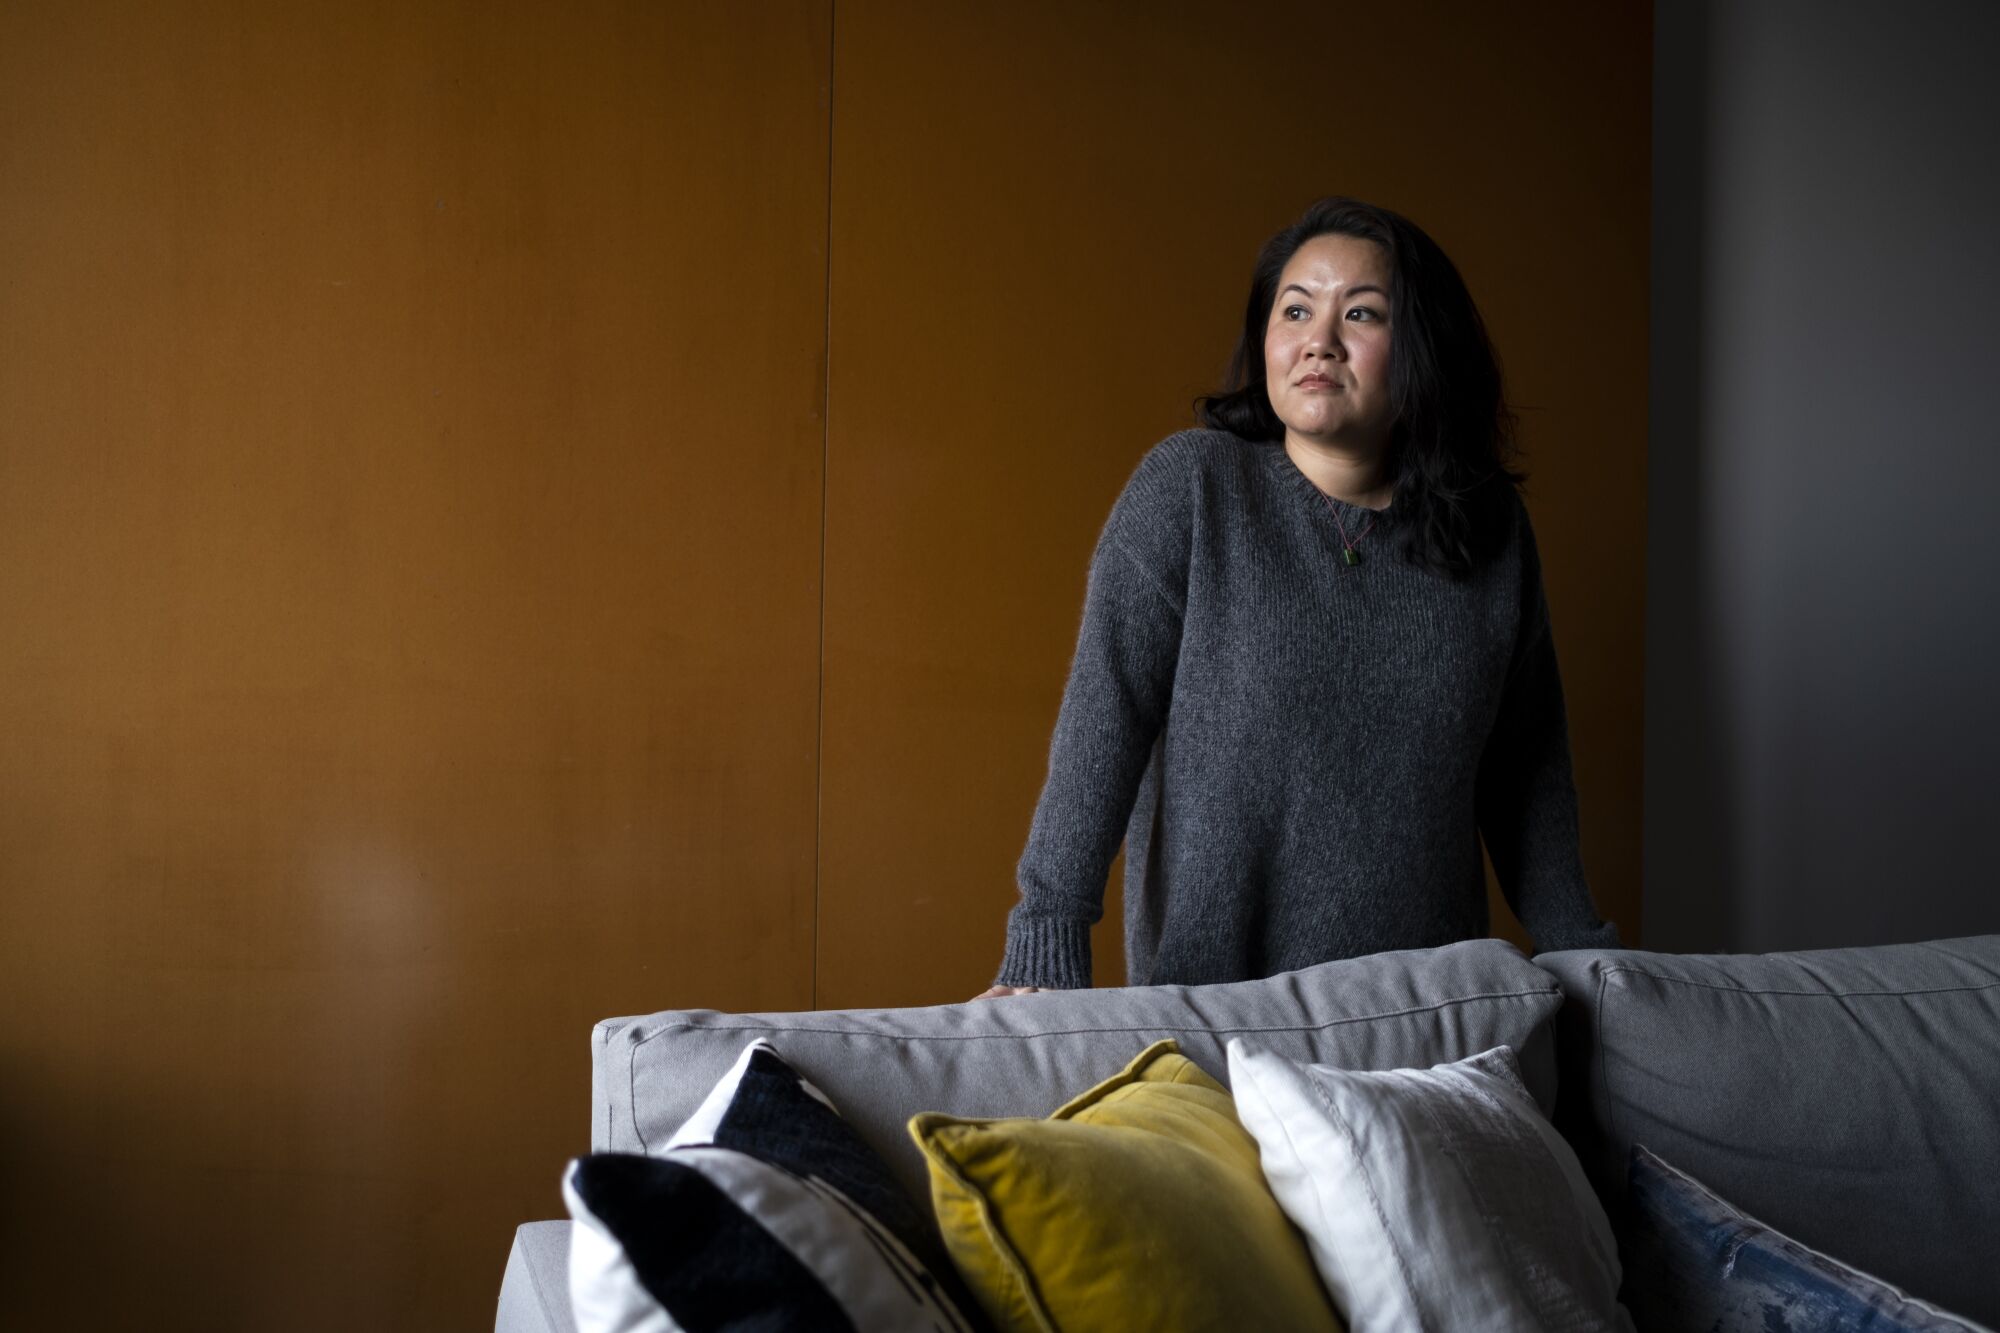  Portrait of Thanh Tan, standing behind a couch 